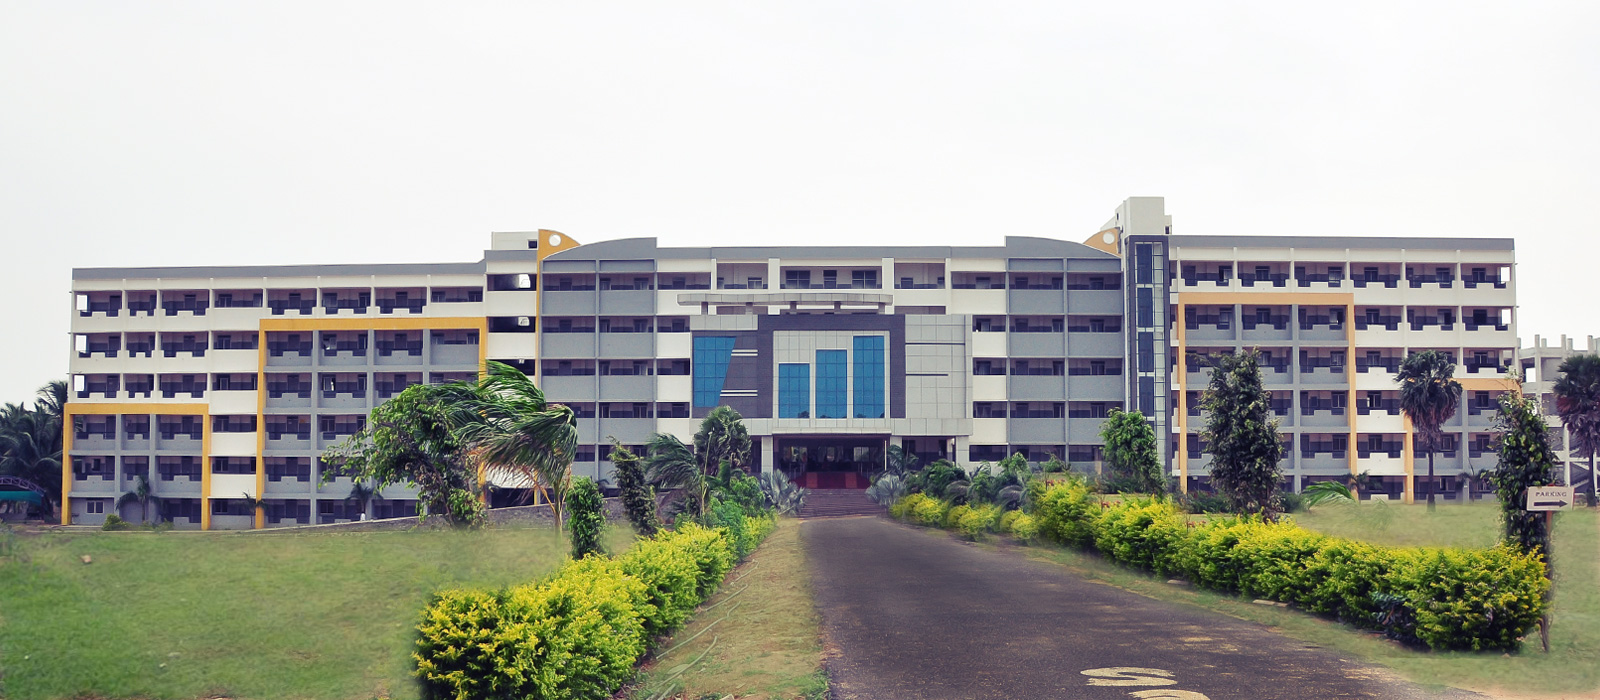 Hindusthan Institute of Technology, Coimbatore Image